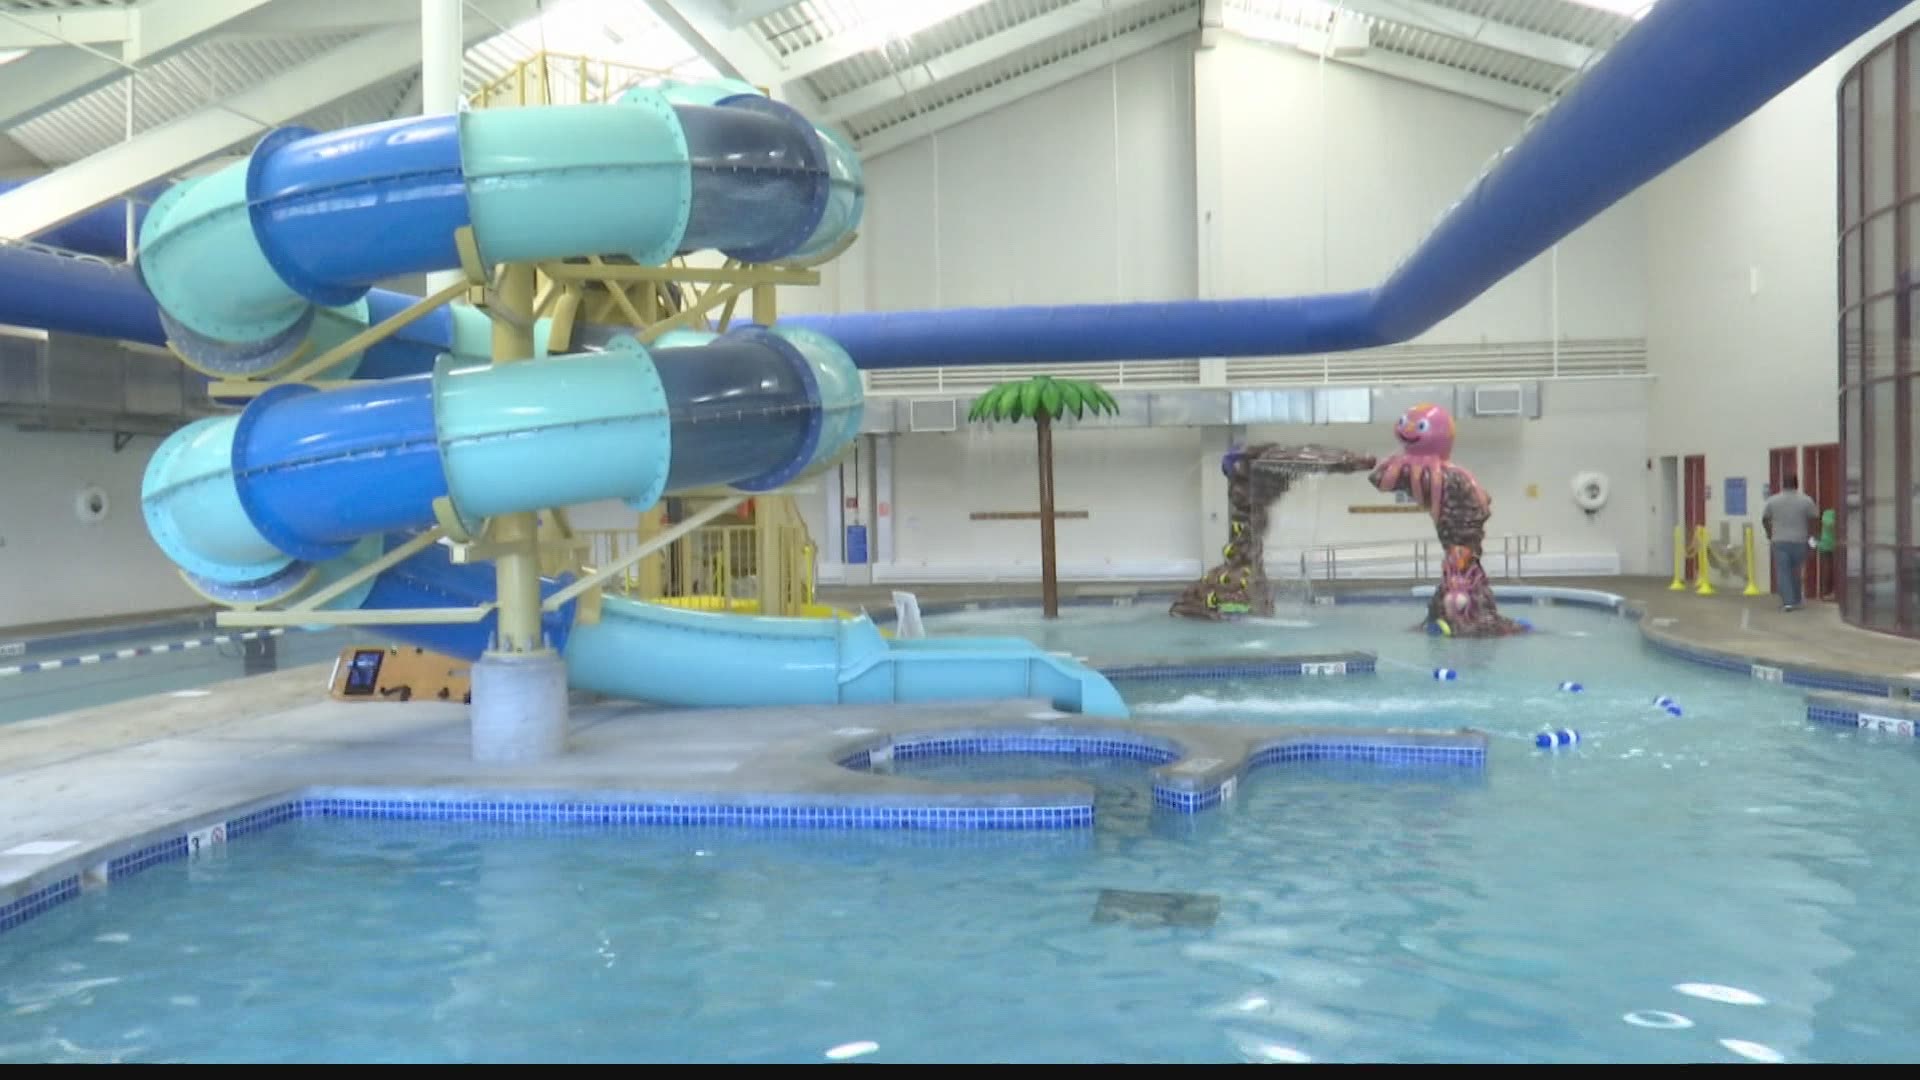 Indy Island Aquatic Center reopened its indoor water park after a major renovation.